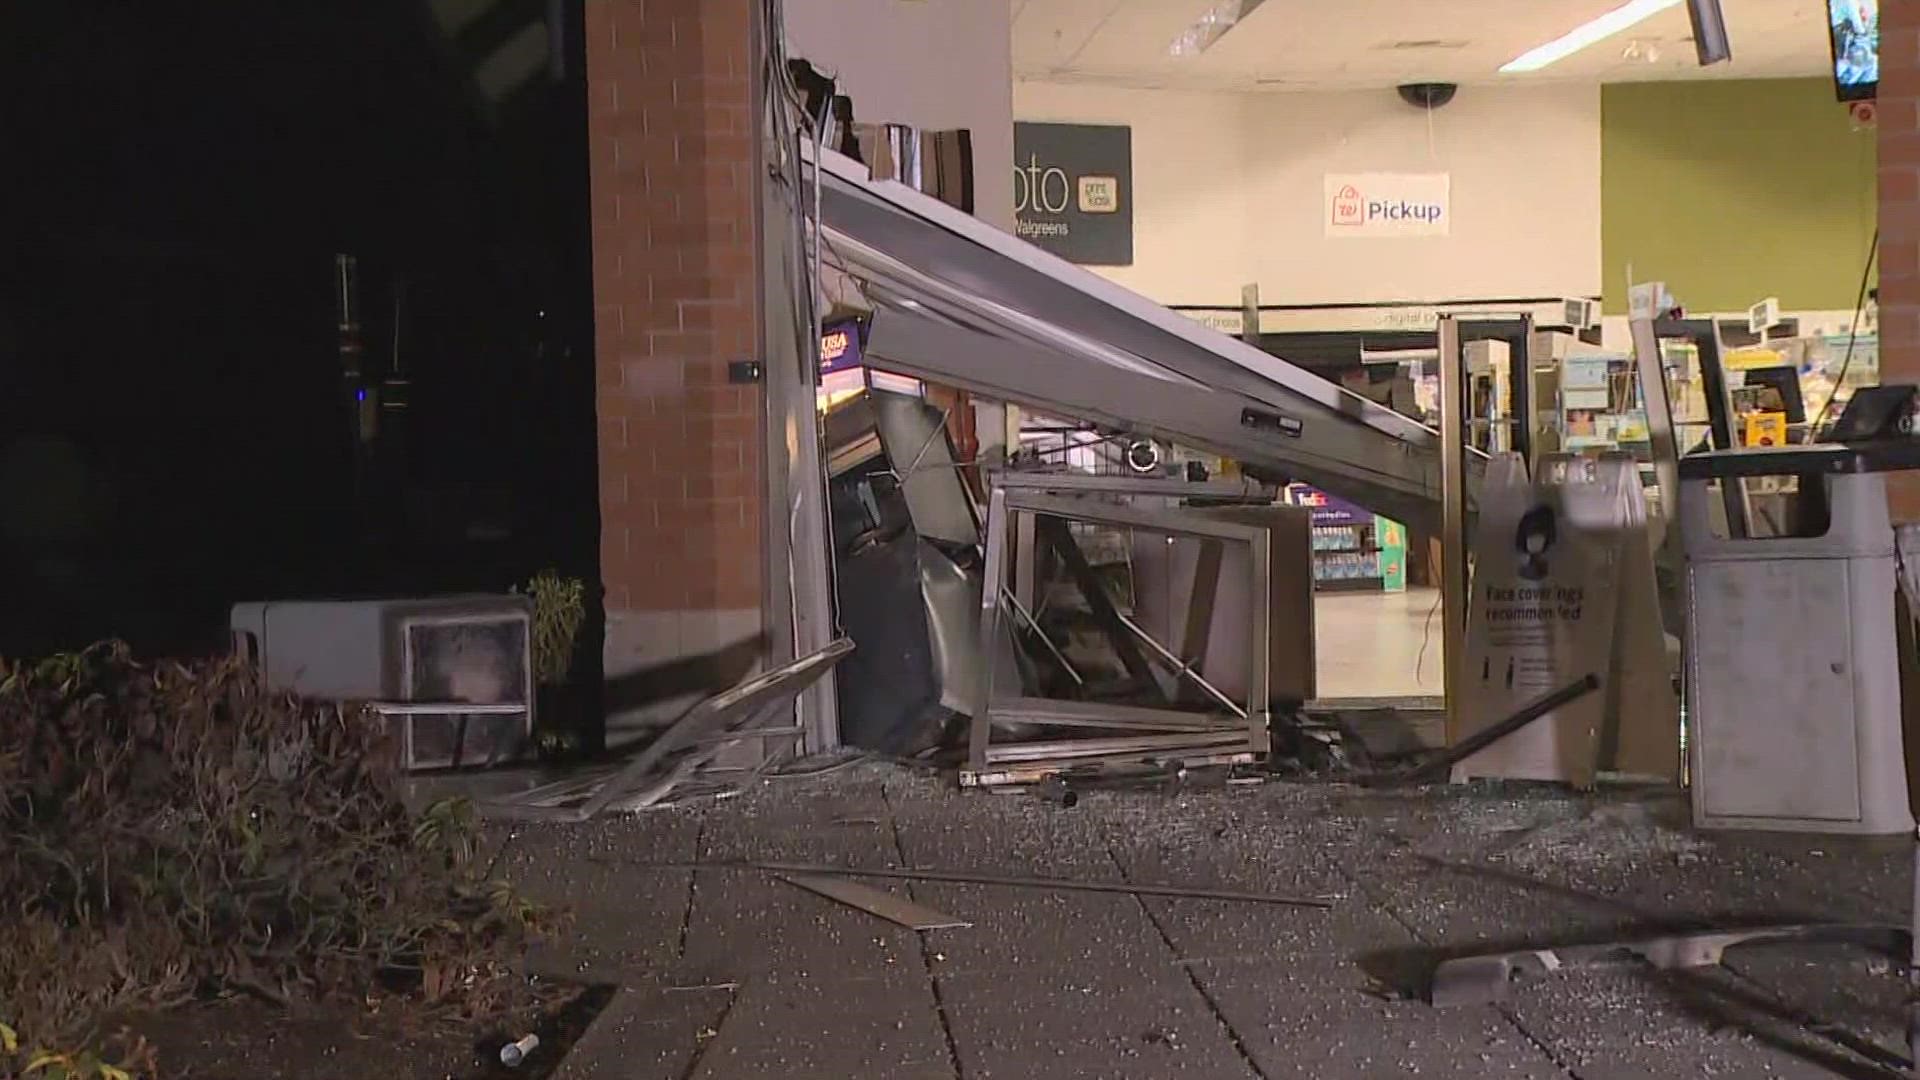 Thieves attempted, unsuccessfully, to steal the ATM at Walgreens on Sunset Blvd in Renton. A massive amount of damage was left behind.